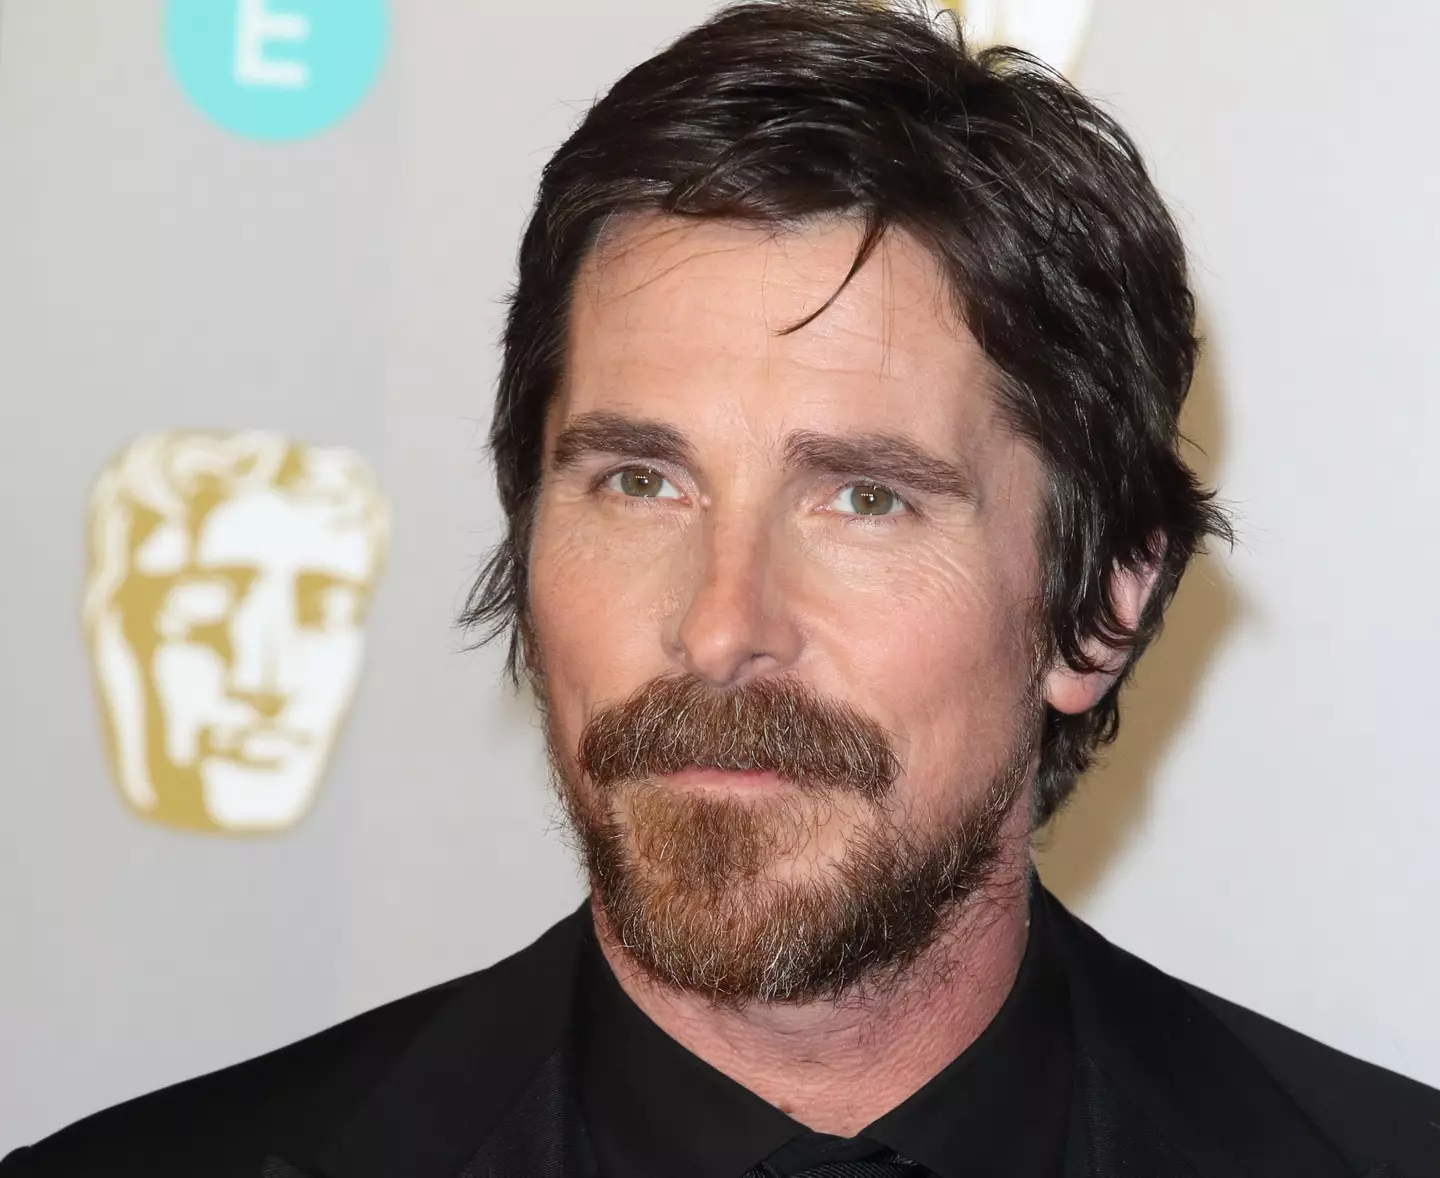 Christian Bale is widely considered a method actor.